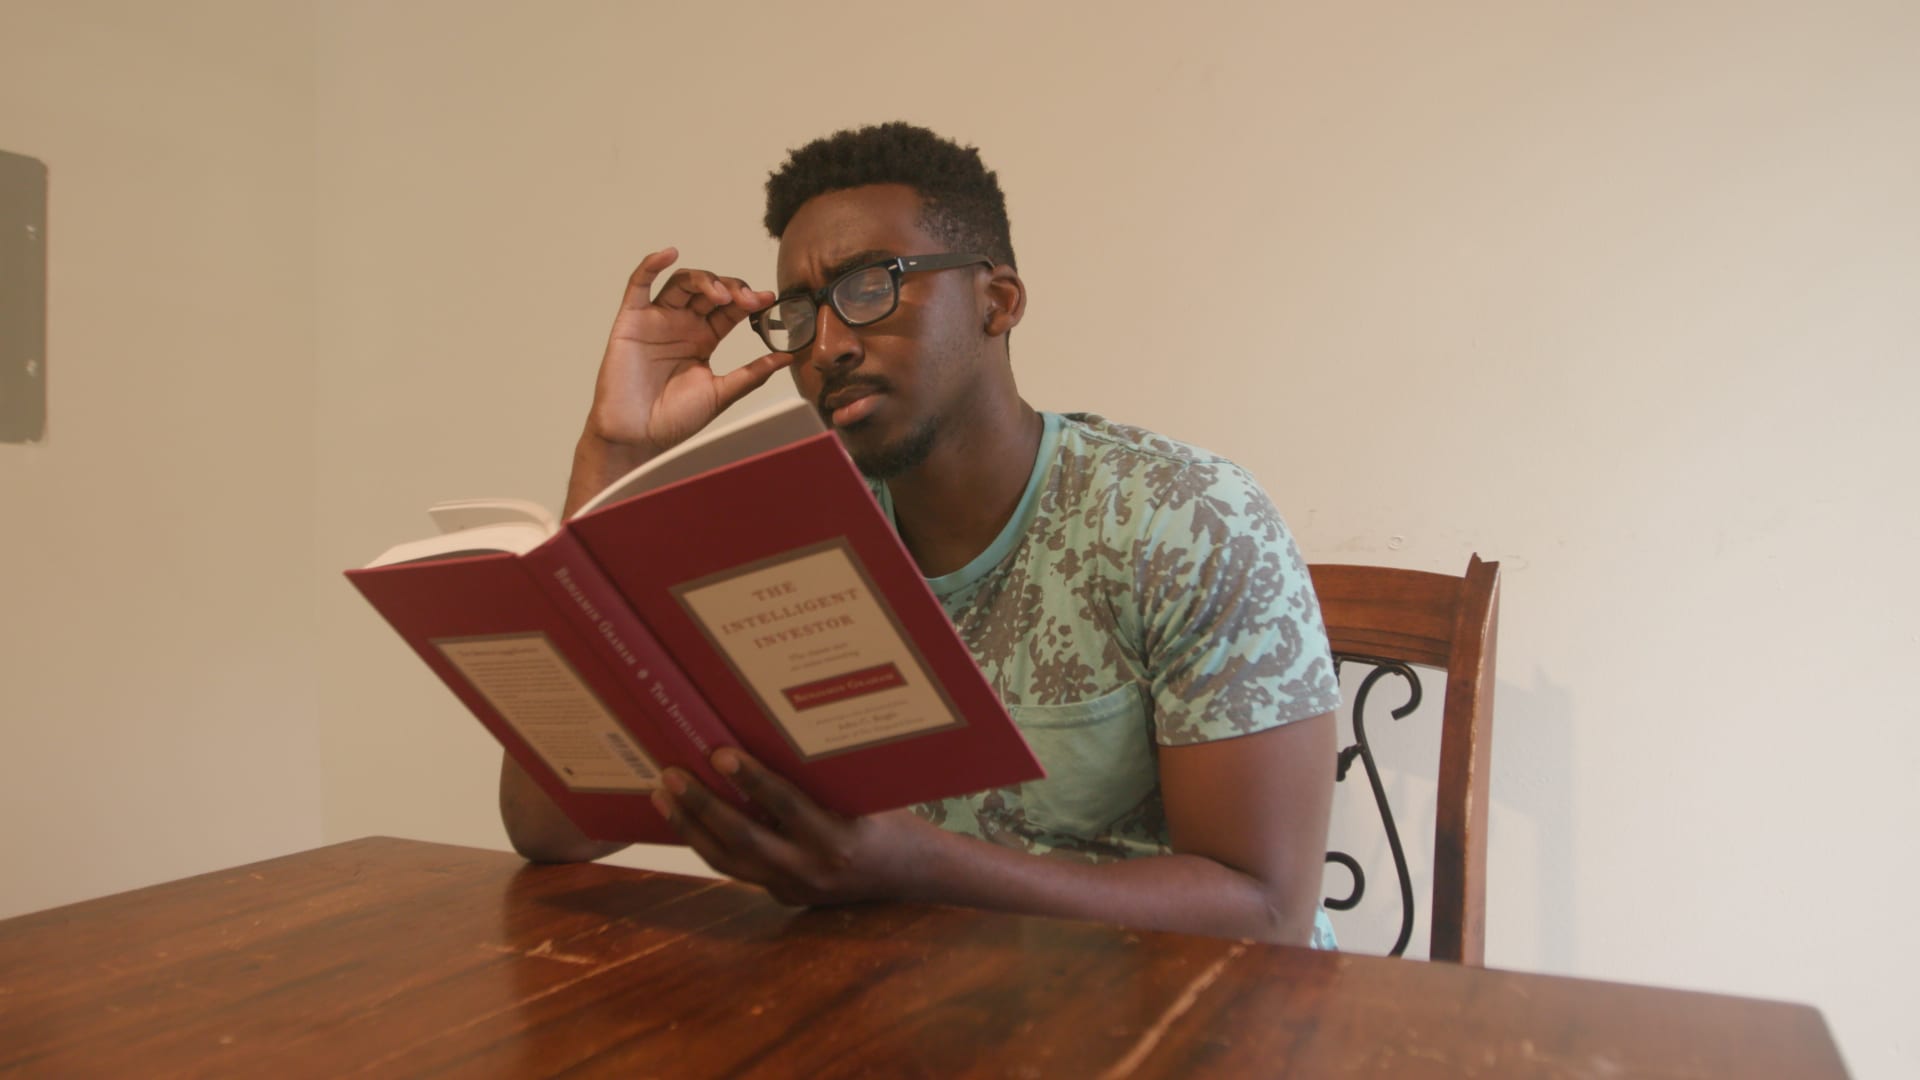 Jerone Gillespie's biggest splurge is on books since he spends as much time as he can reading. His favorite topics include science, business, self-development, money and investing.